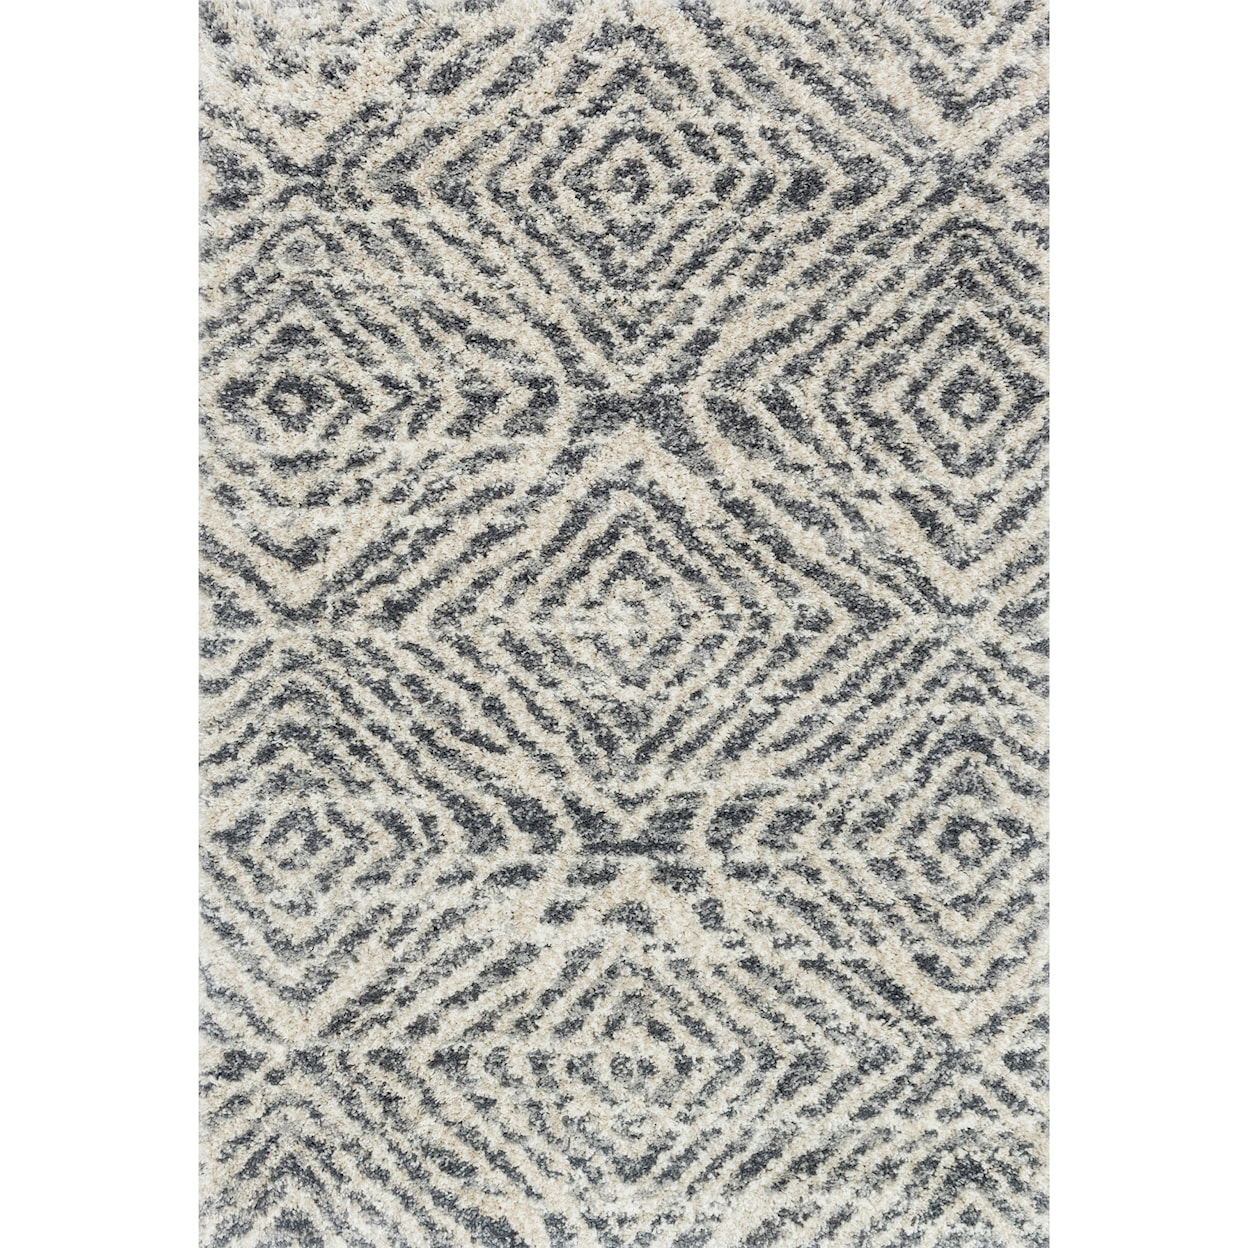 Reeds Rugs Quincy 8'10" x 12' Graphite / Sand Rug